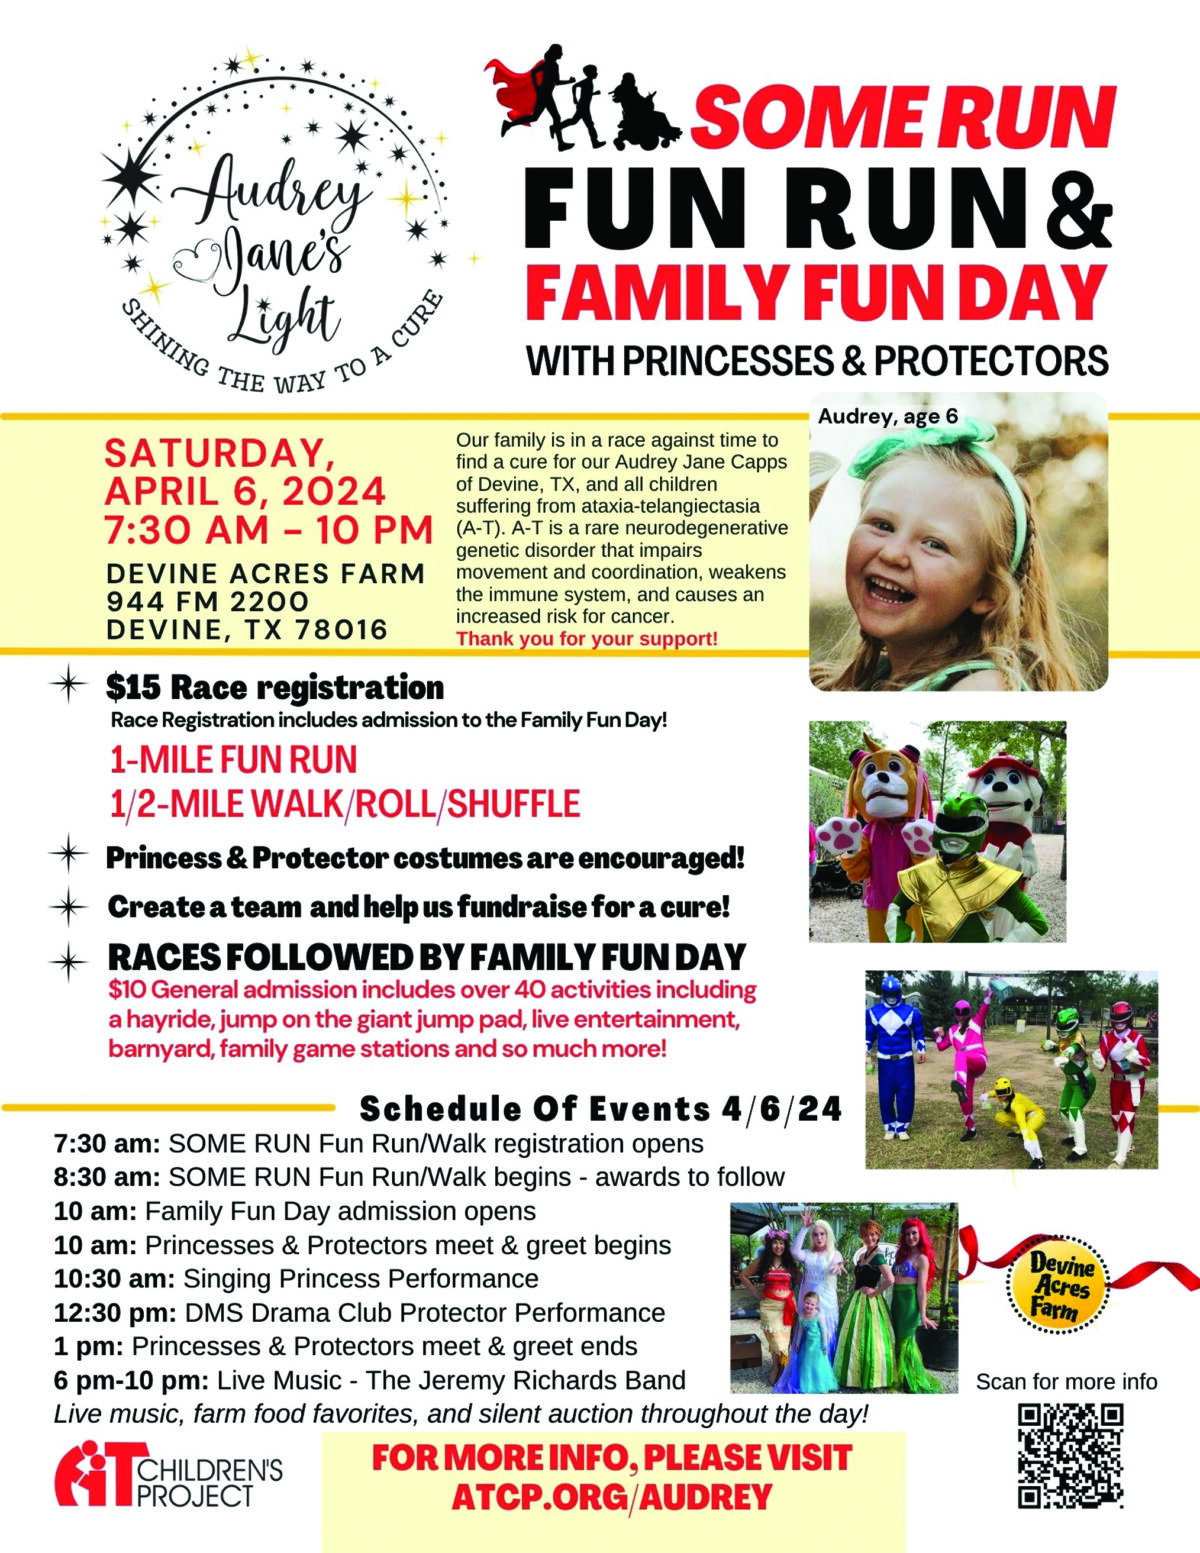 Family fun day at Devine Acres to benefit the family of Audrey Jane Capps